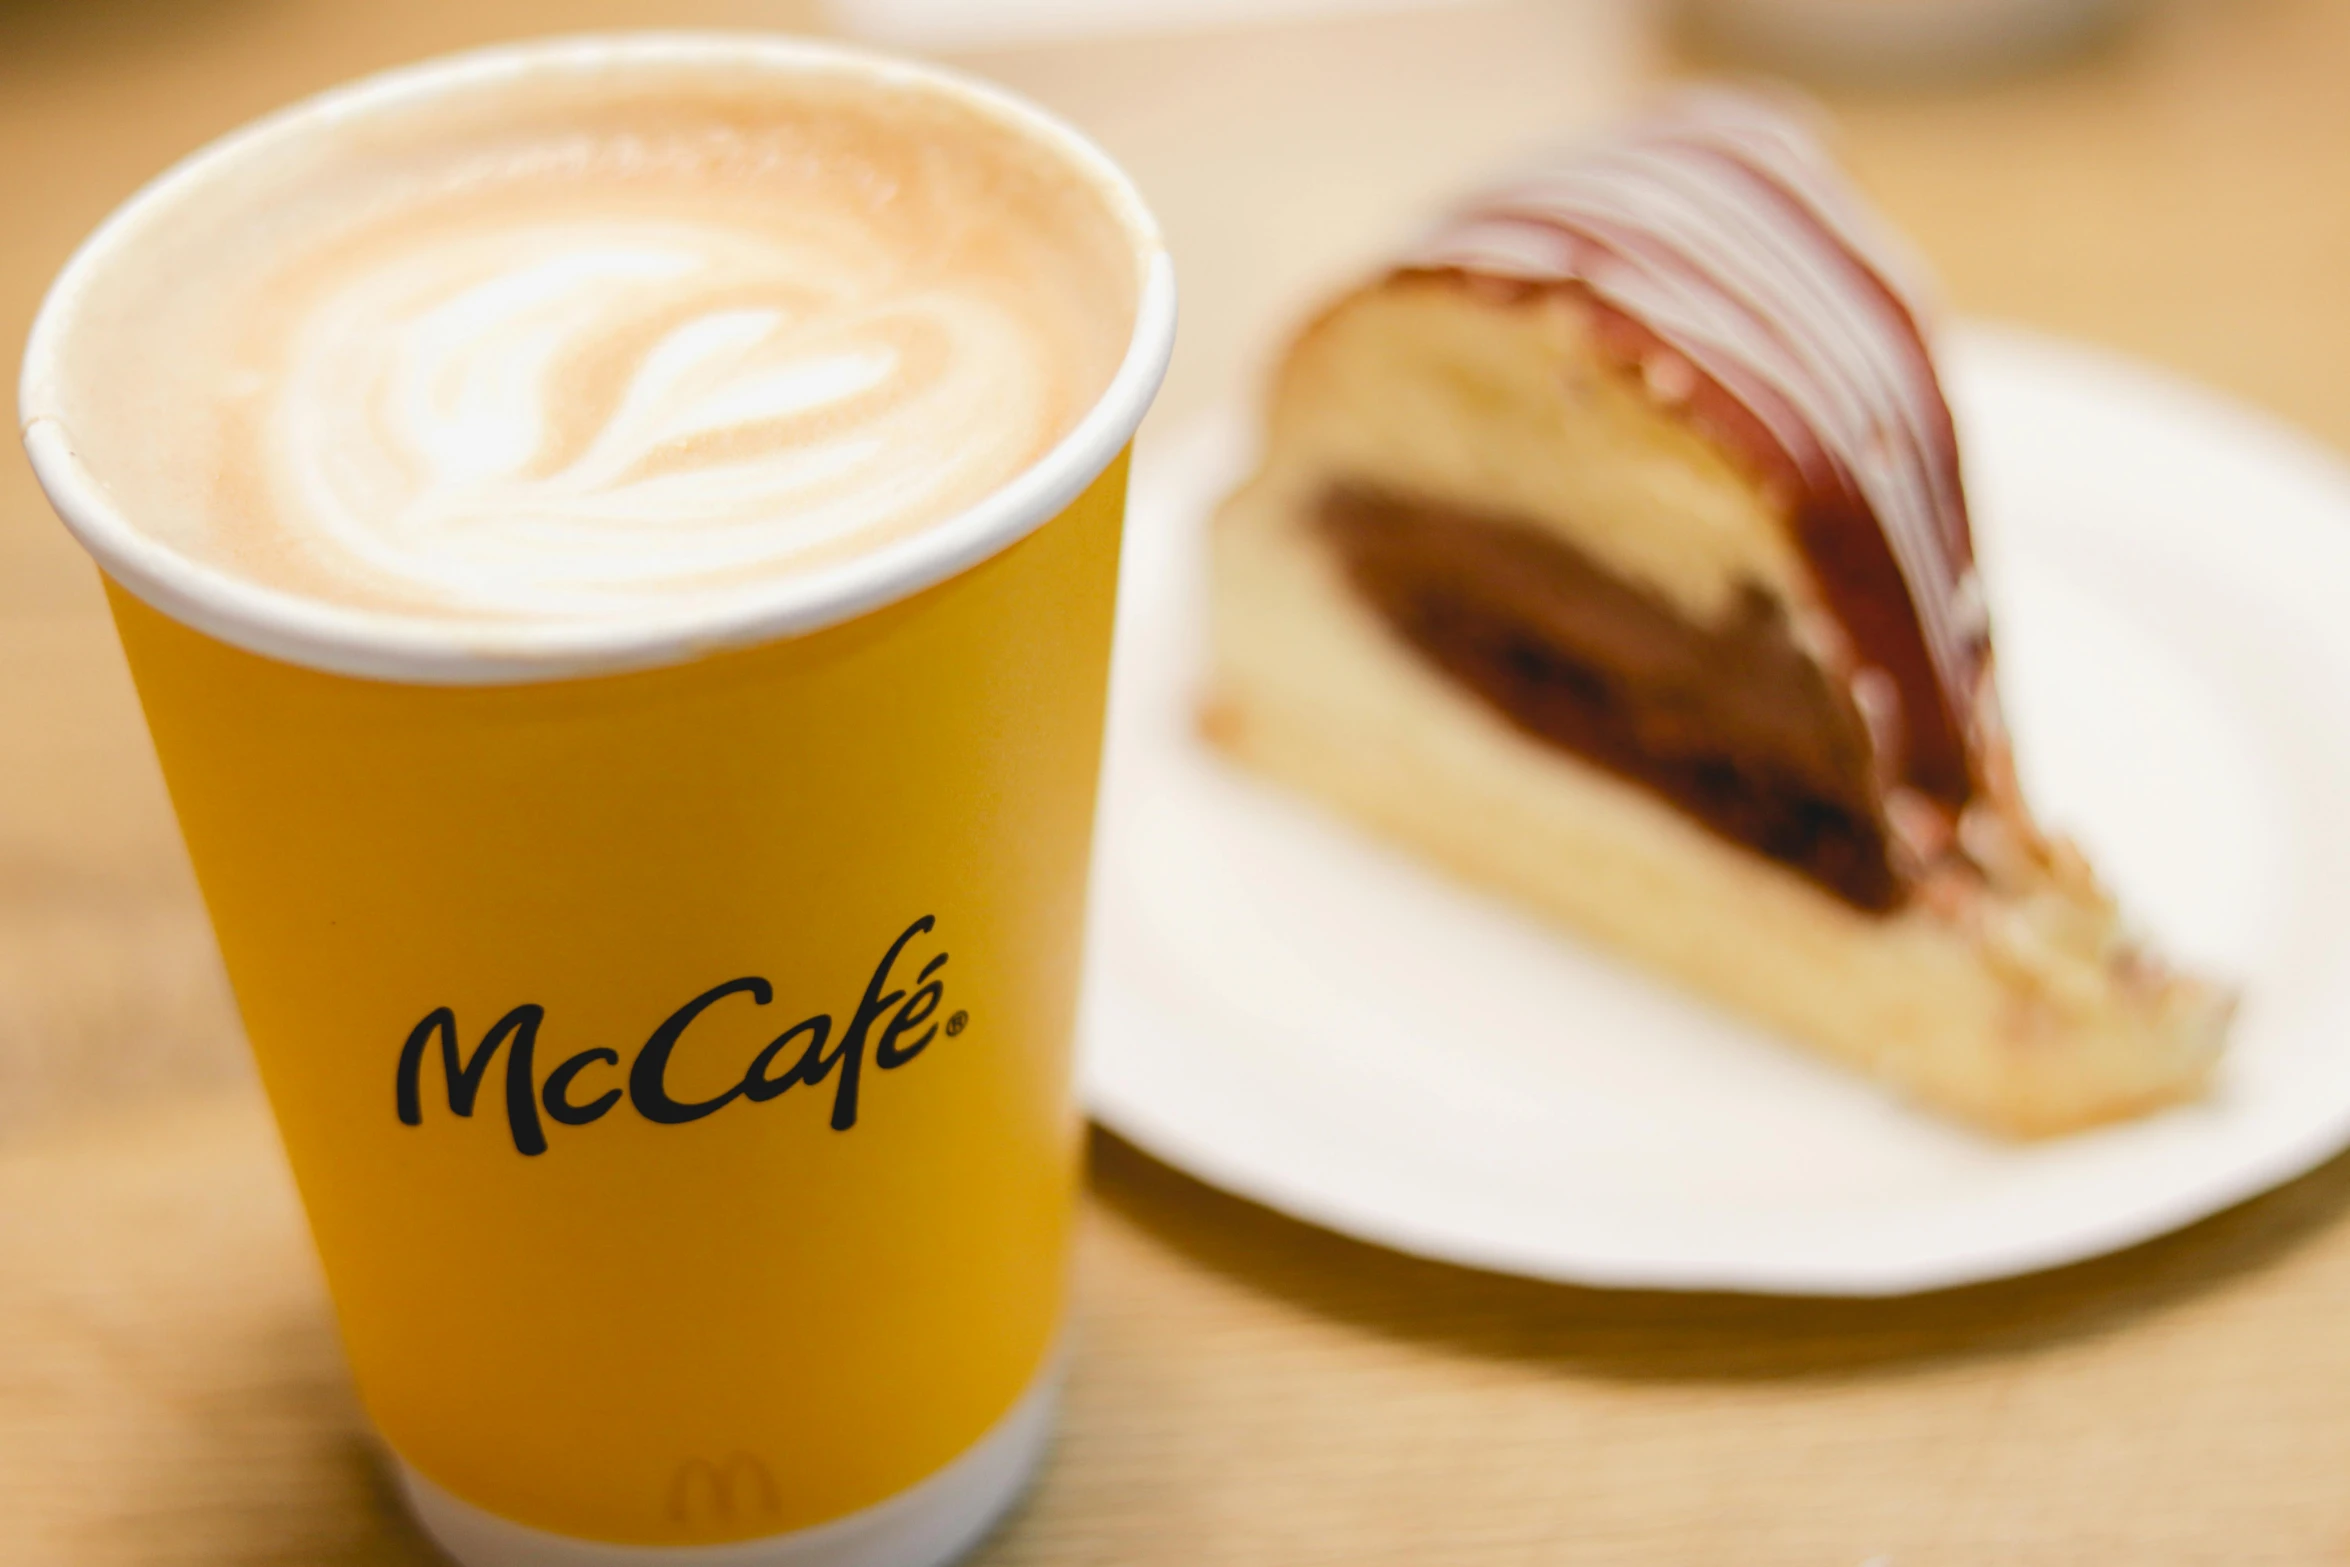 a piece of cake on a plate next to a cup of coffee, by Peter McArdle, mcdonalds interior background, macguire is a tall, thumbnail, profile image